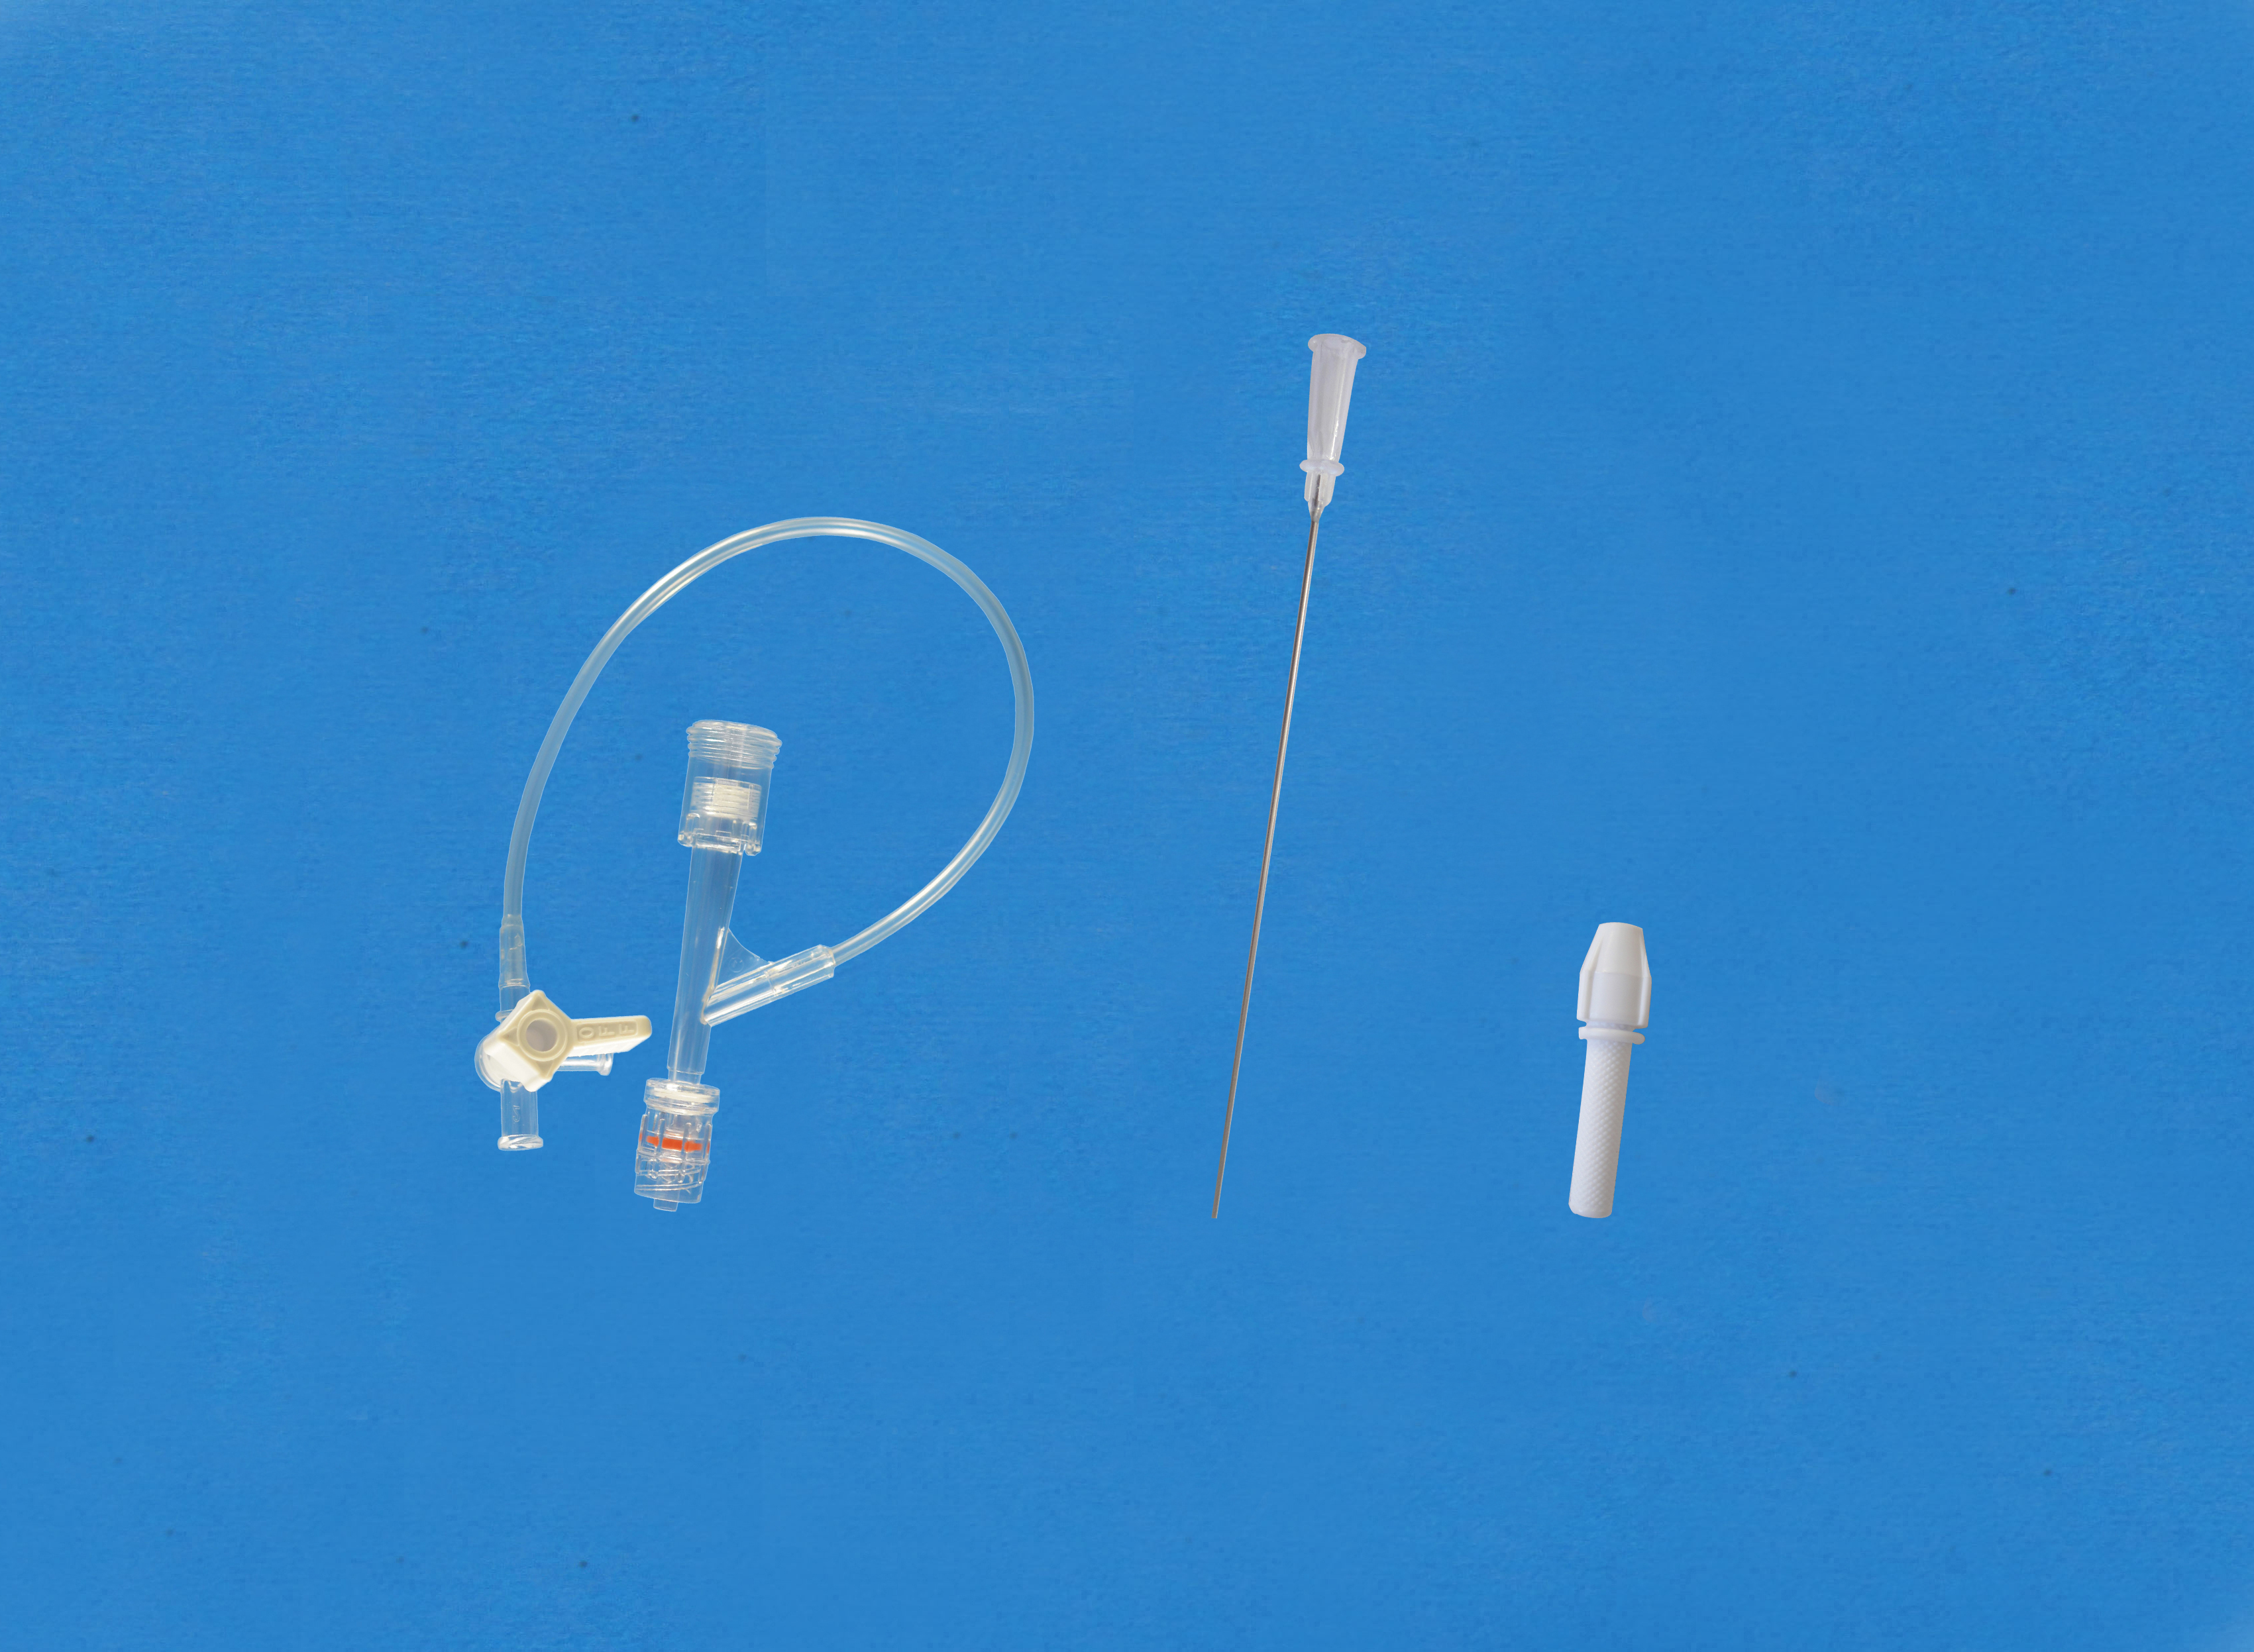 Haemostatic valves, Push-pull, Sideon Tubing and Stopcock, Insertion Tool with Small Hub, White/Copper Torquer